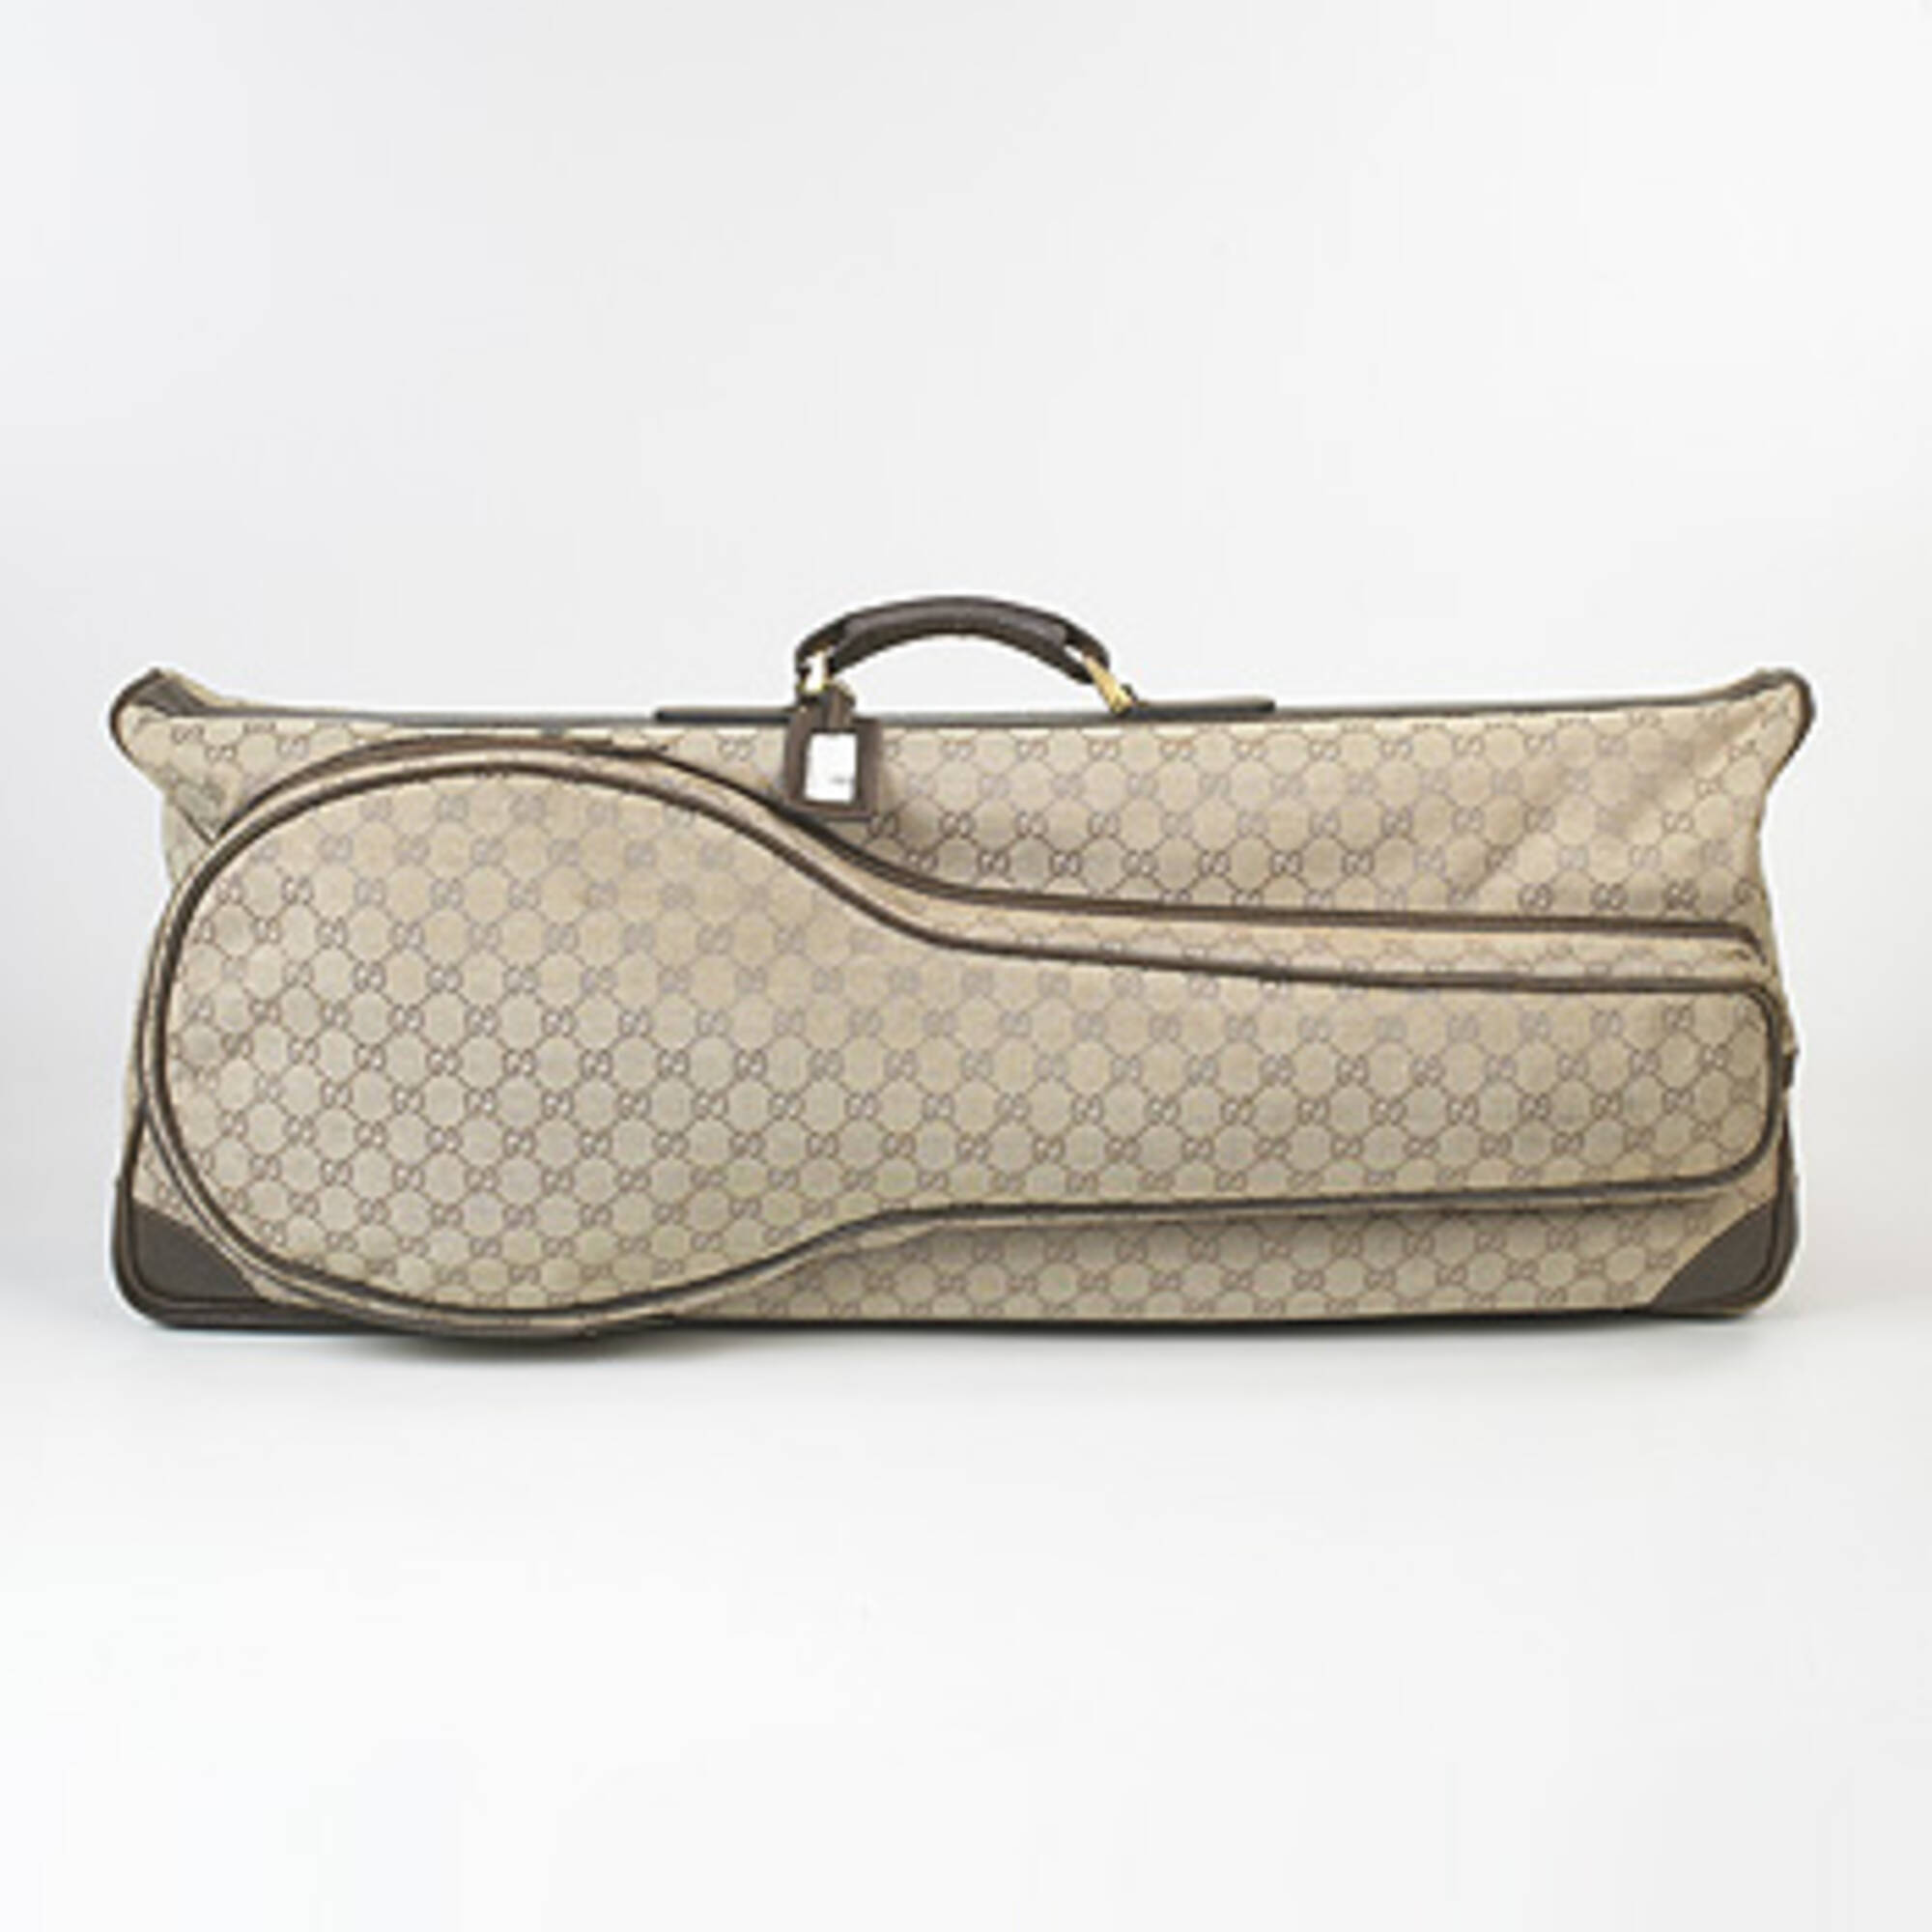 450: GUCCI, tennis bag < Branded Luxury, 25 April 2006 < Auctions